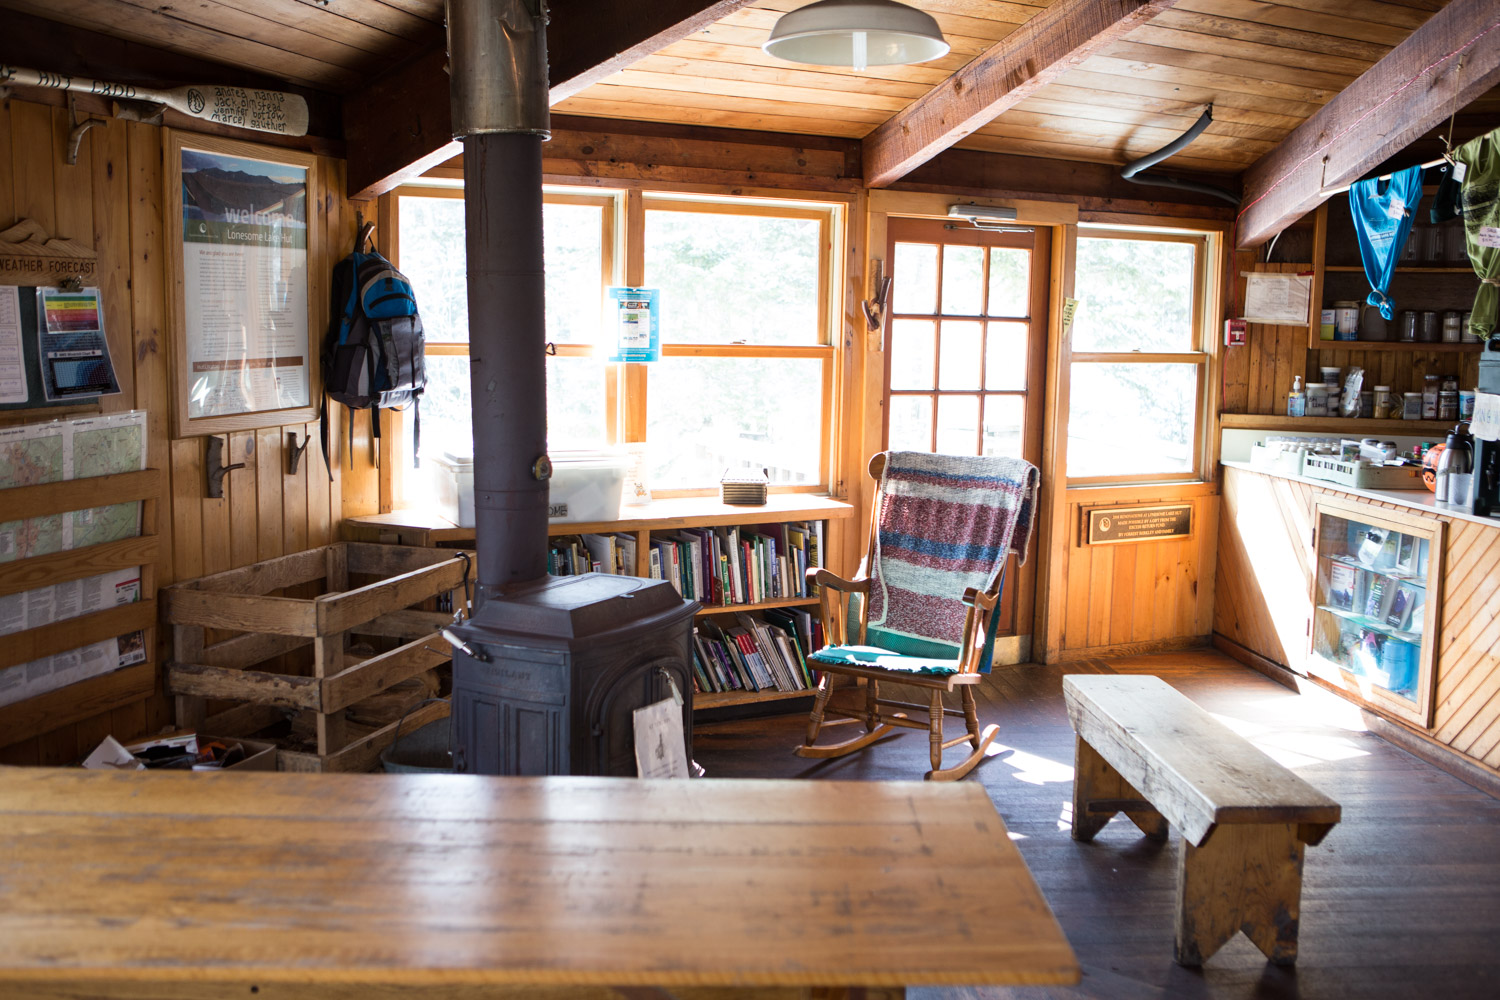 The interior of Lonesome Lake Hut (main building)